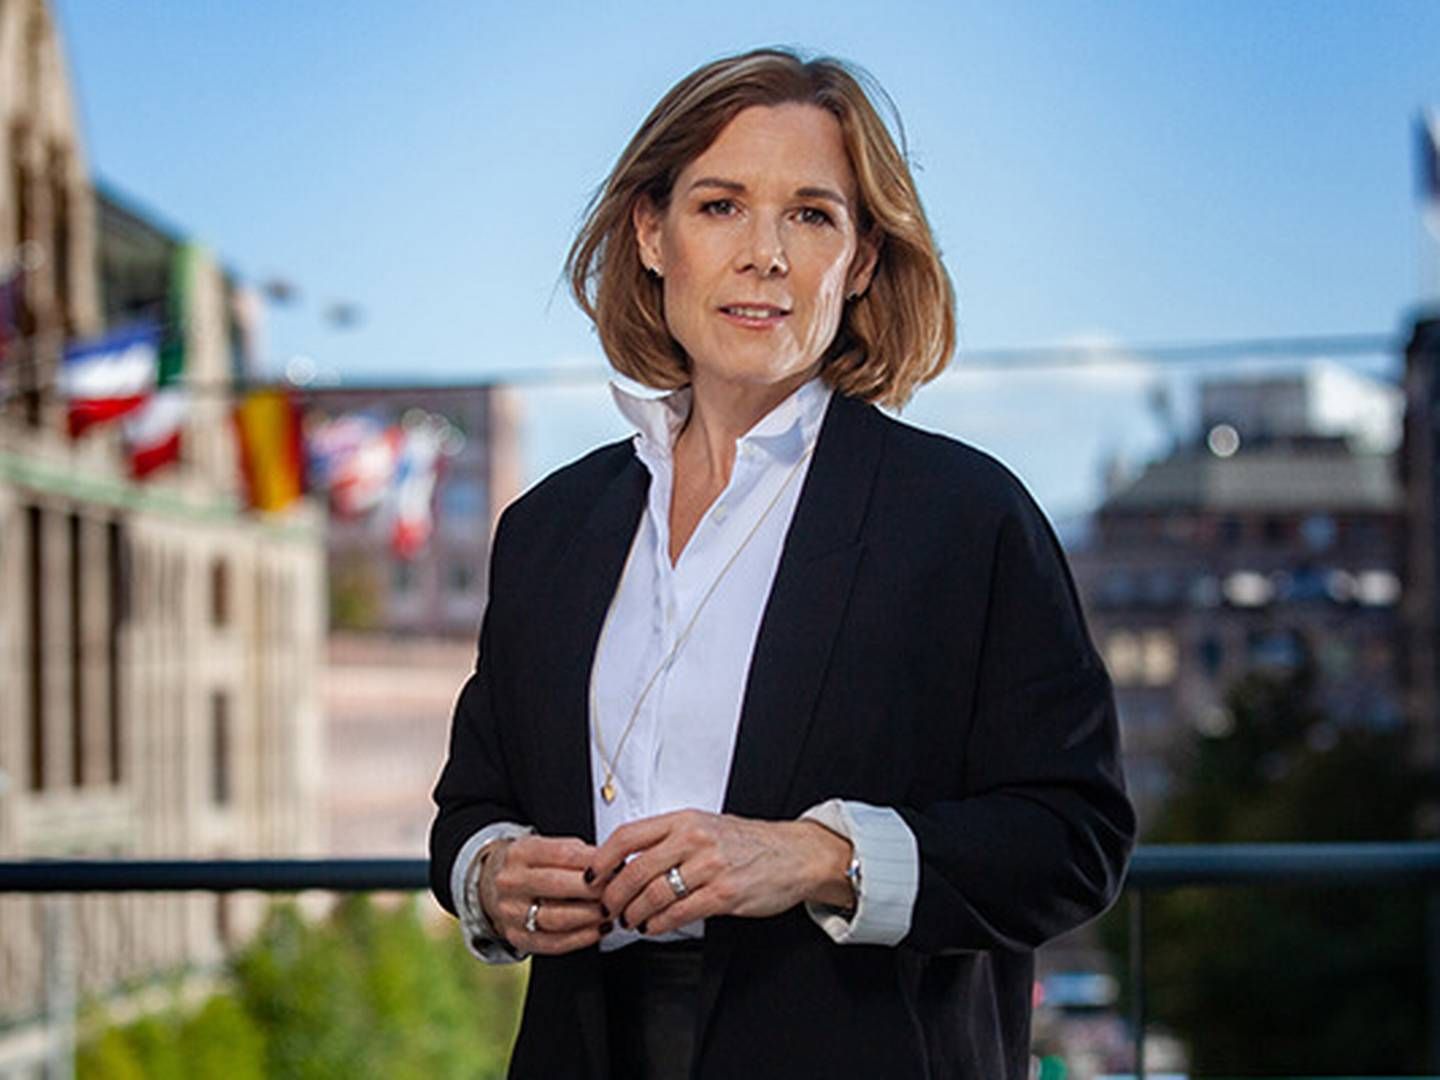 Åsa Wallenberg, CEO of Storebrand Fonder, says that winning “in this market climate shows our strength within different asset classes and investment strategies”. | Photo: Storebrand Fonder / Pr